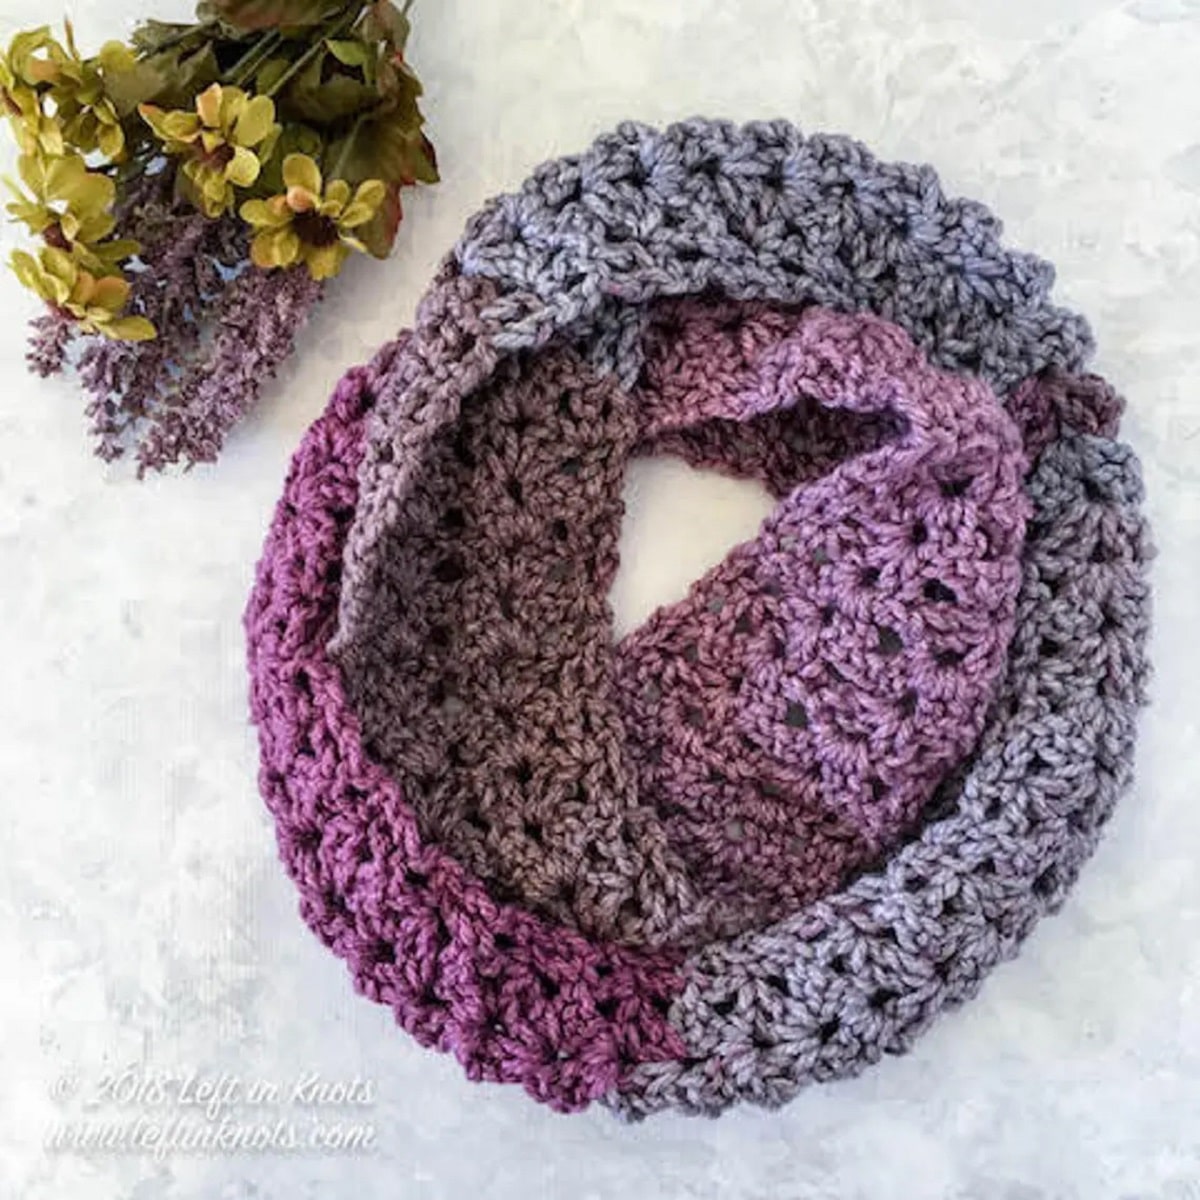 Light purple, dark purple, and gray crochet infinity scarf wrapped into a circle on a white background next to some yellow and purple flowers.